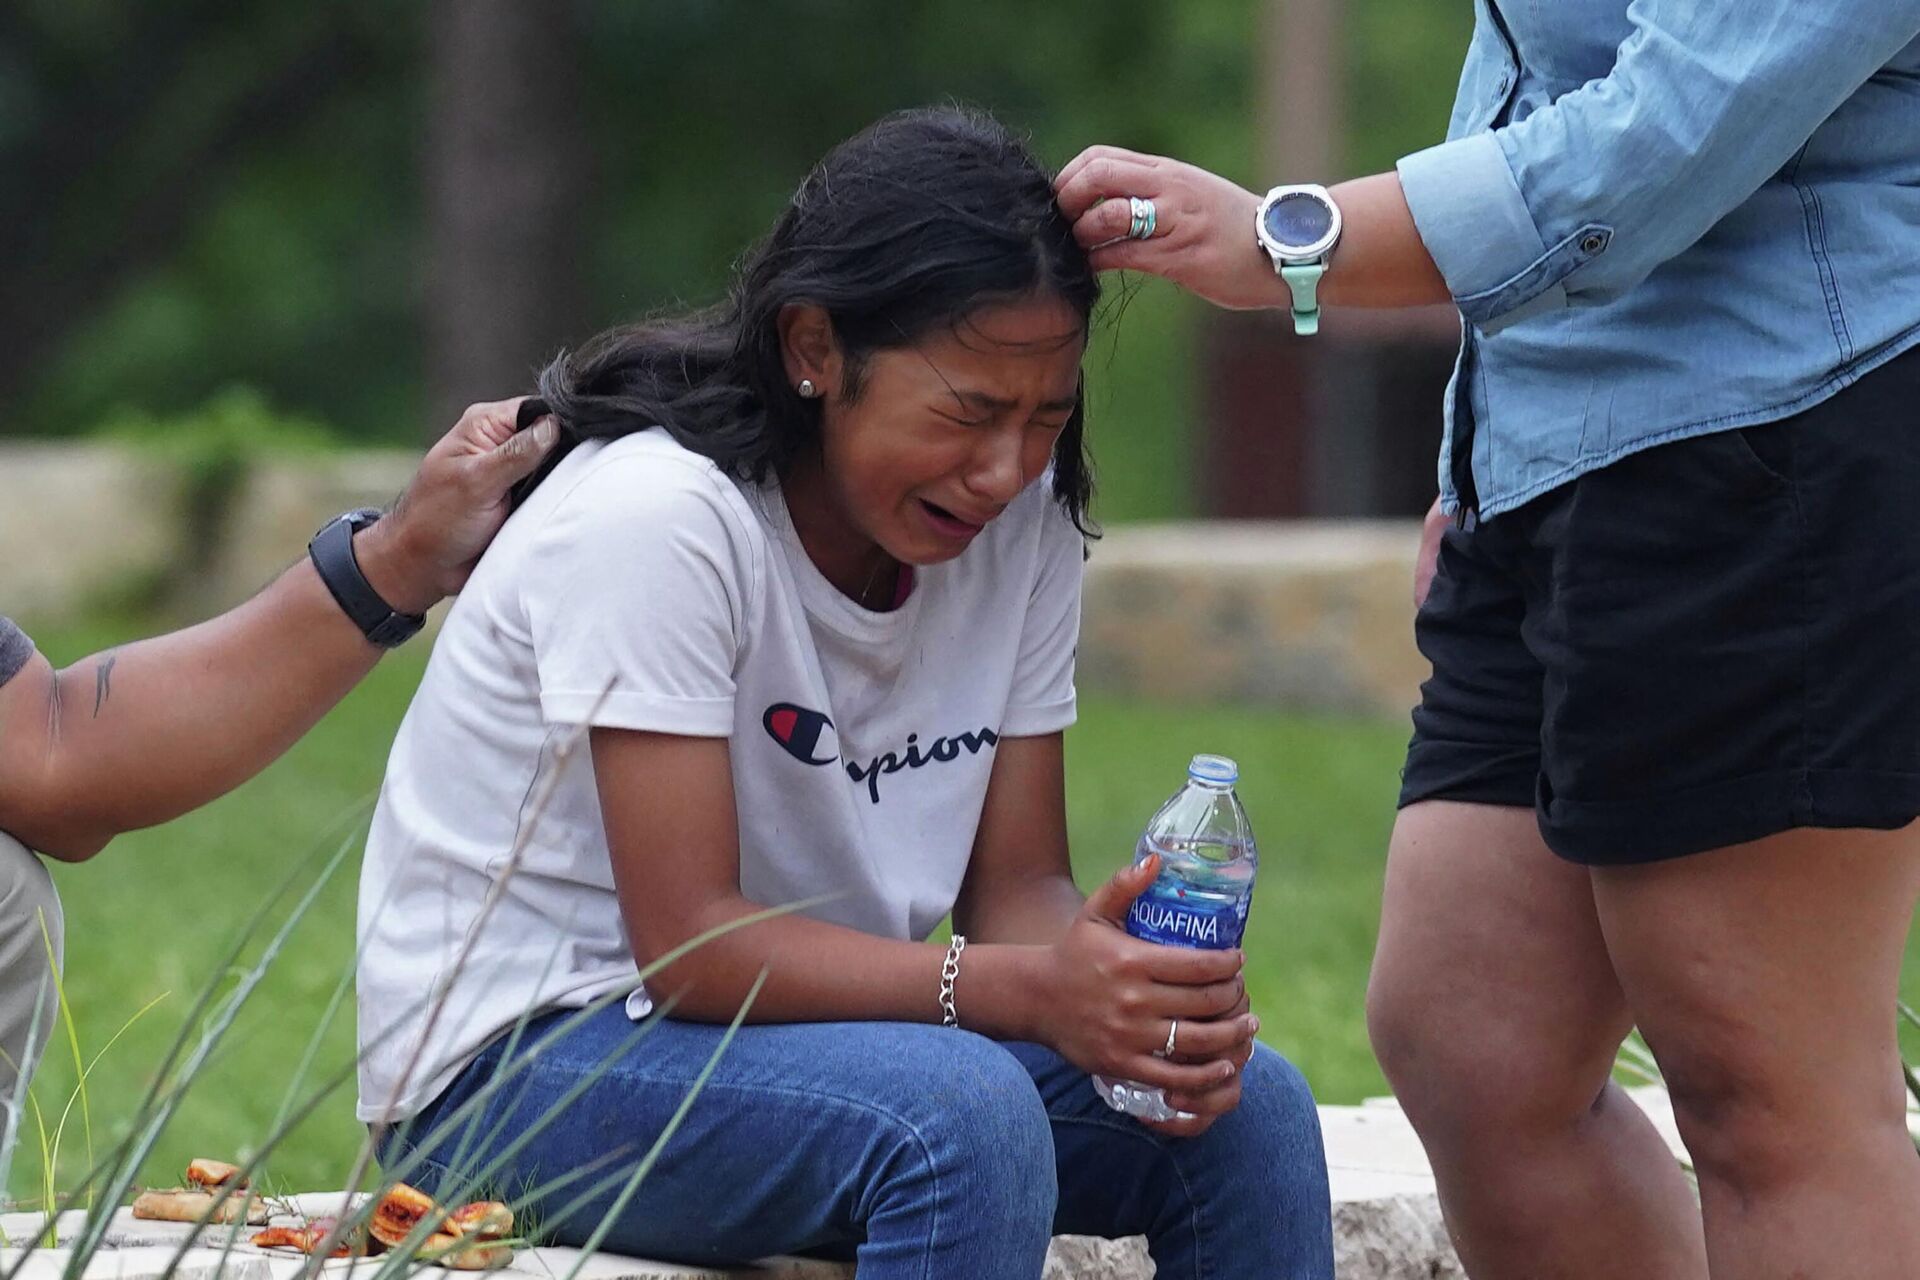 A girl cries, comforted by two adults, outside the Willie de Leon Civic Center where grief counseling will be offered in Uvalde, Texas, on May 24, 2022. - A teenage gunman killed 18 young children in a shooting at an elementary school in Texas on Tuesday, in the deadliest US school shooting in years. - Sputnik International, 1920, 25.05.2022